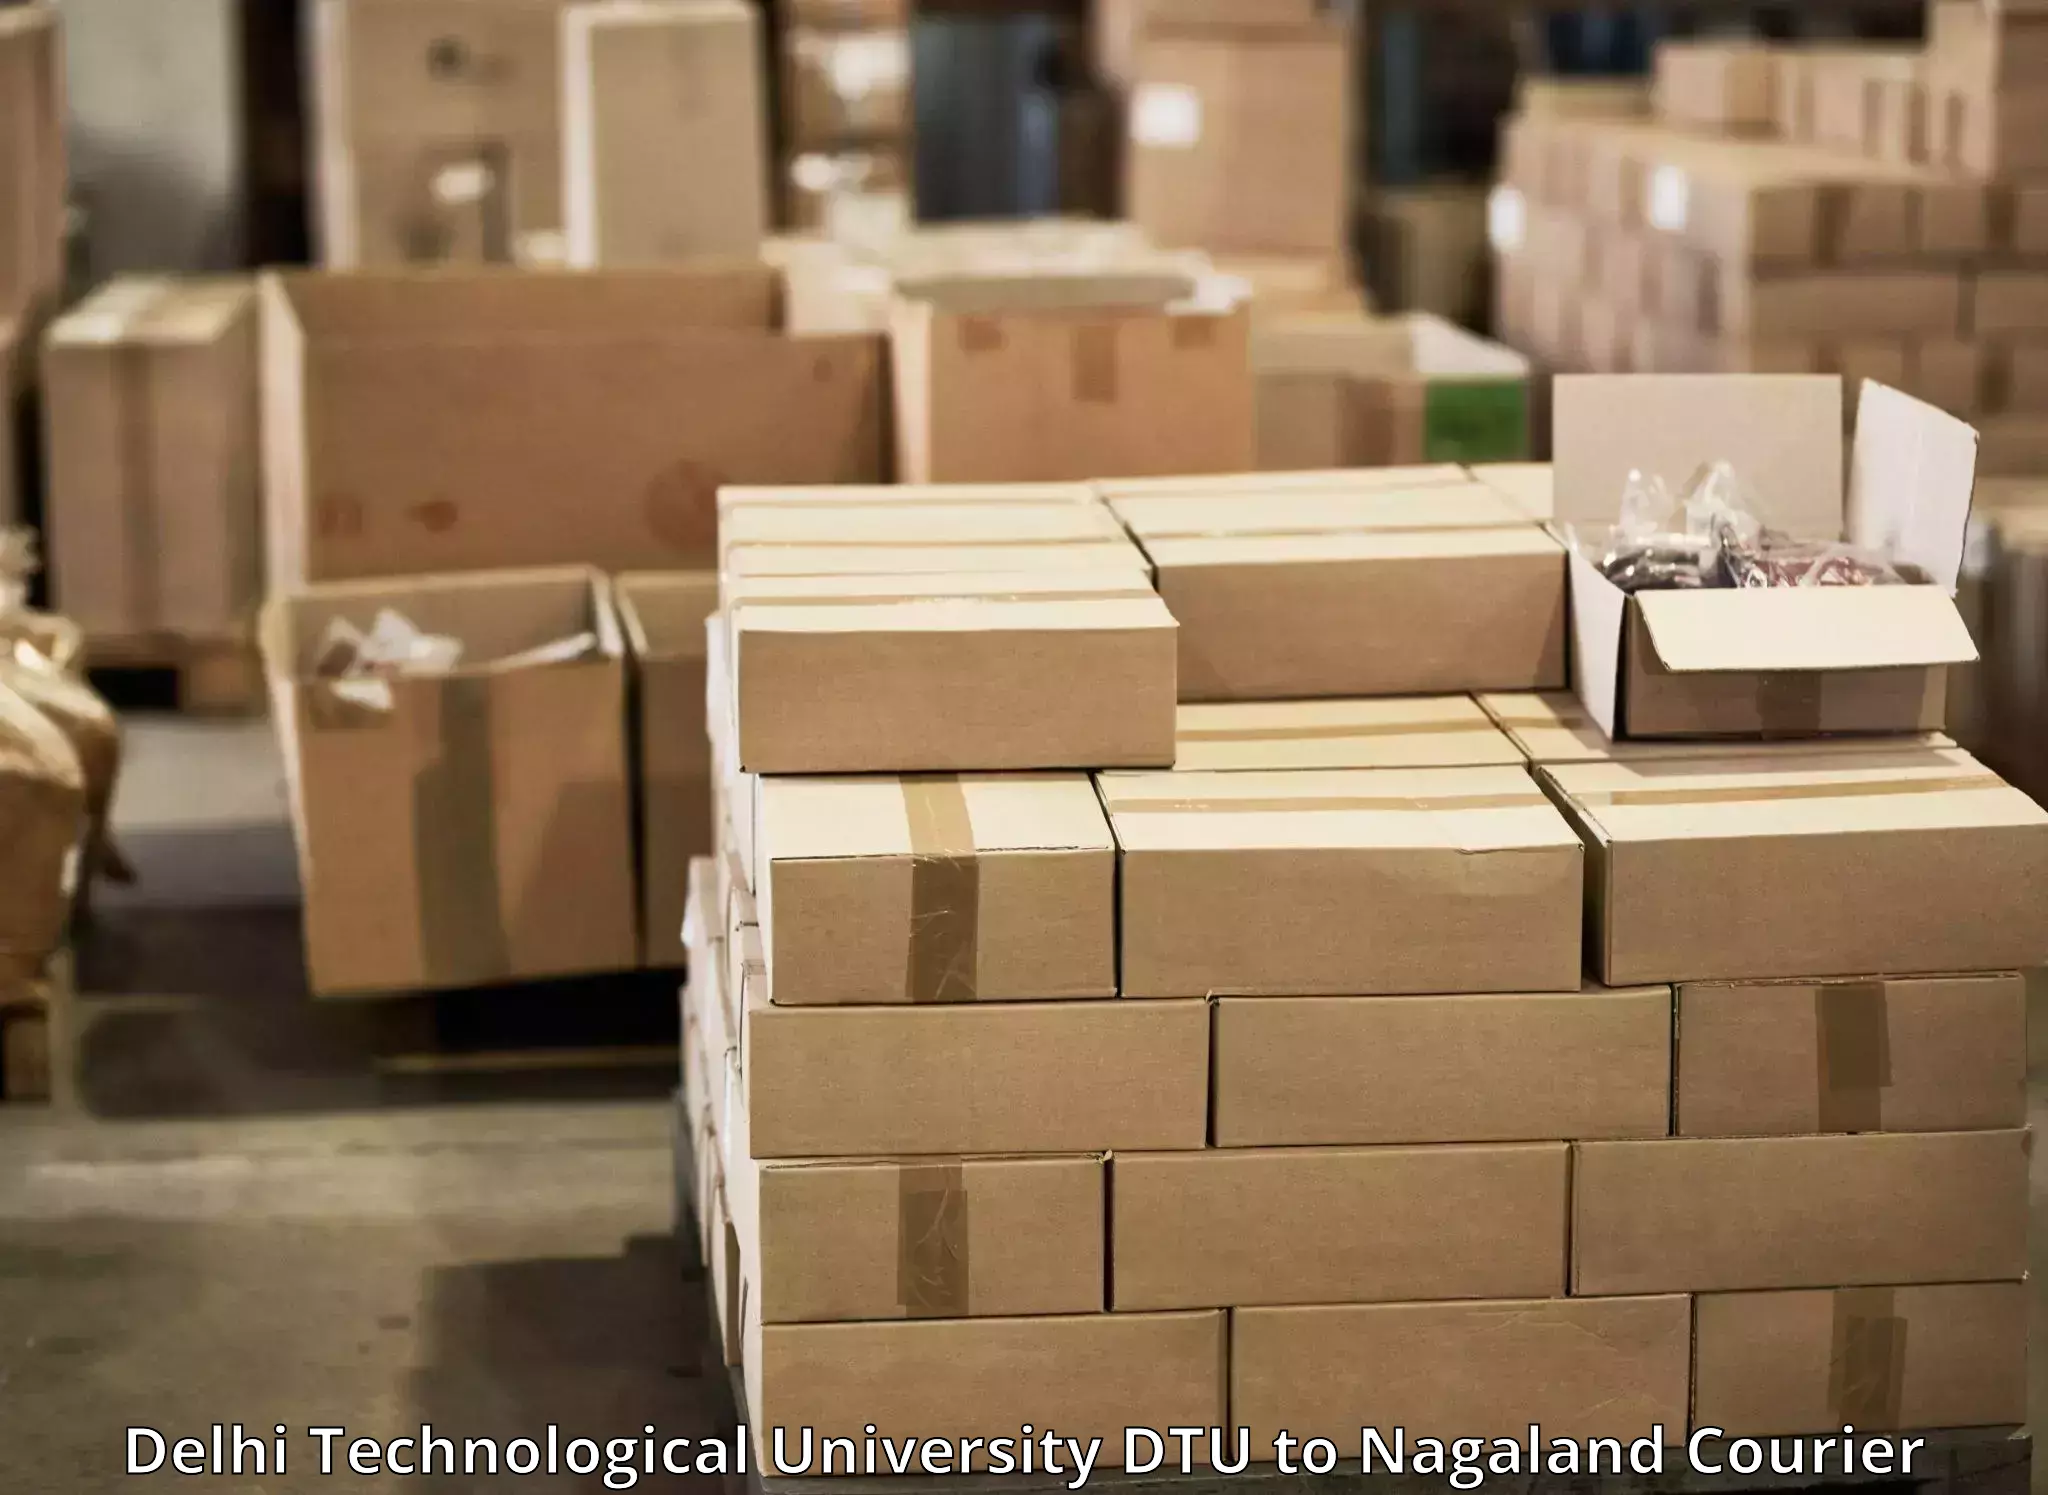 On-call courier service Delhi Technological University DTU to Peren